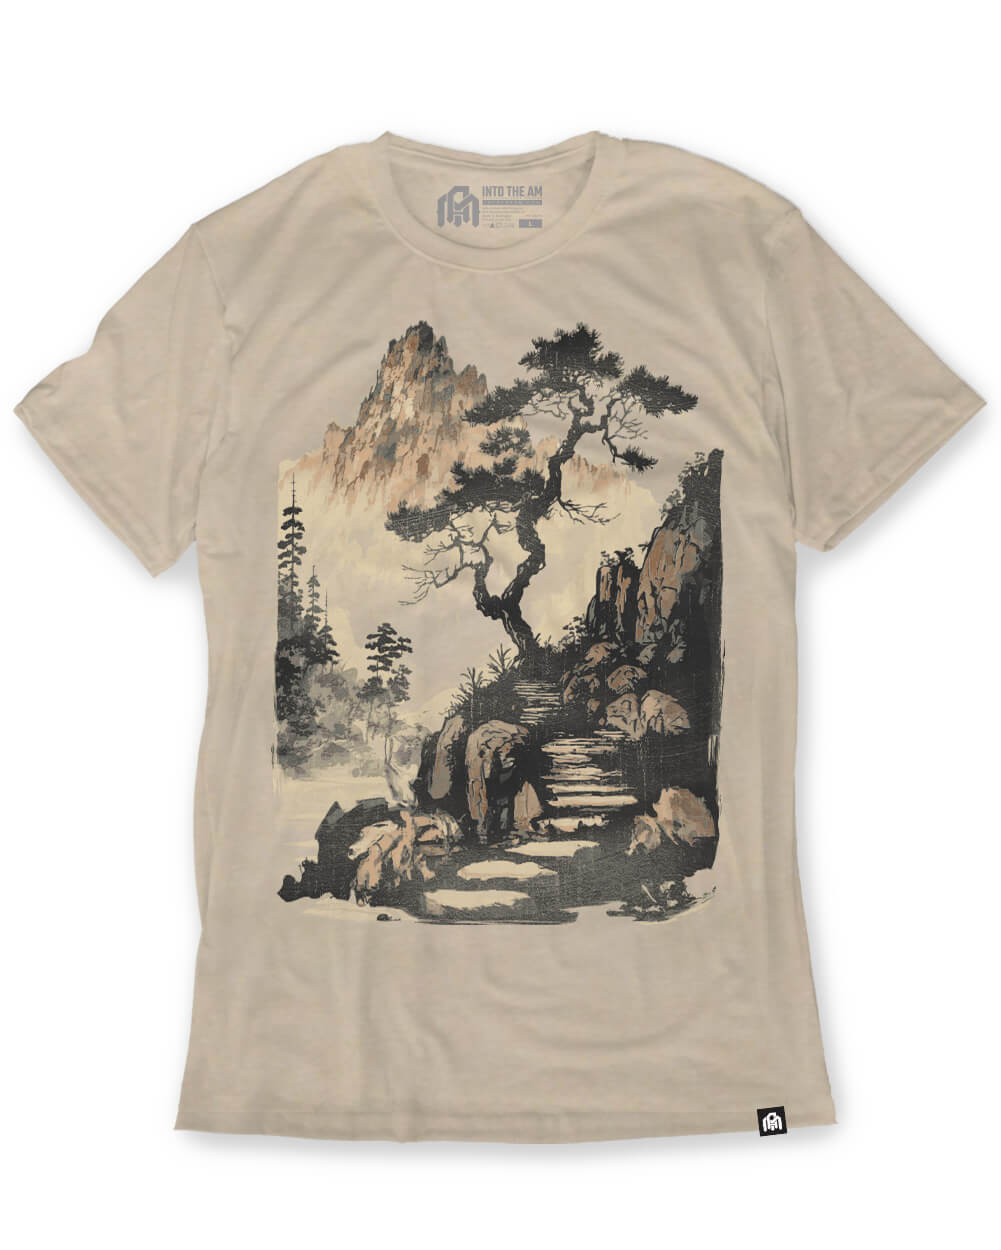 Men's Graphic Tees & Cool T-Shirts